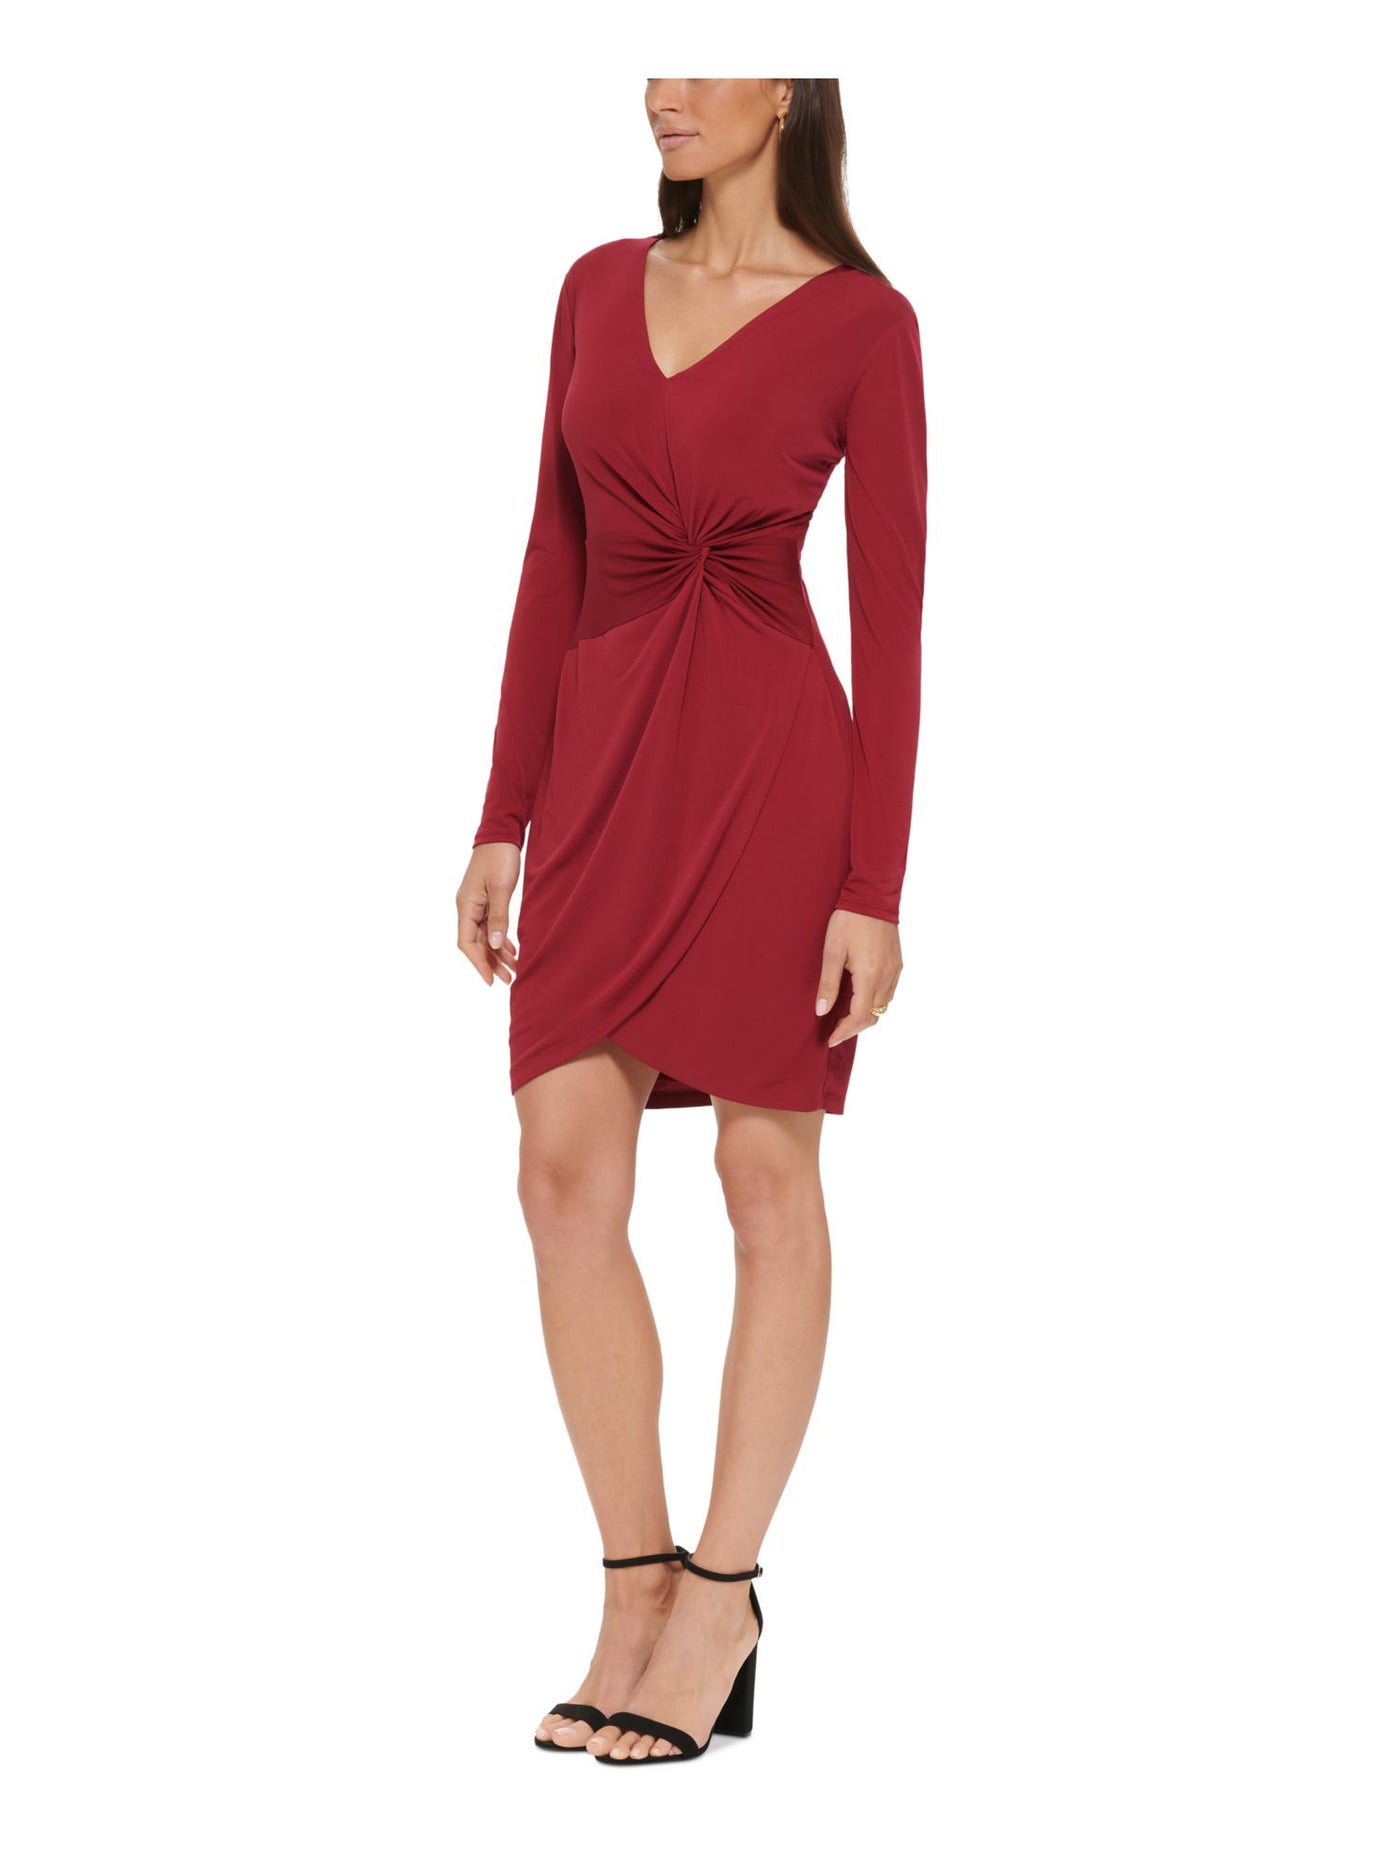 GUESS Womens Burgundy Twist Front Zippered Pont Long Sleeve V Neck Above The Knee Party Tulip Dress 4